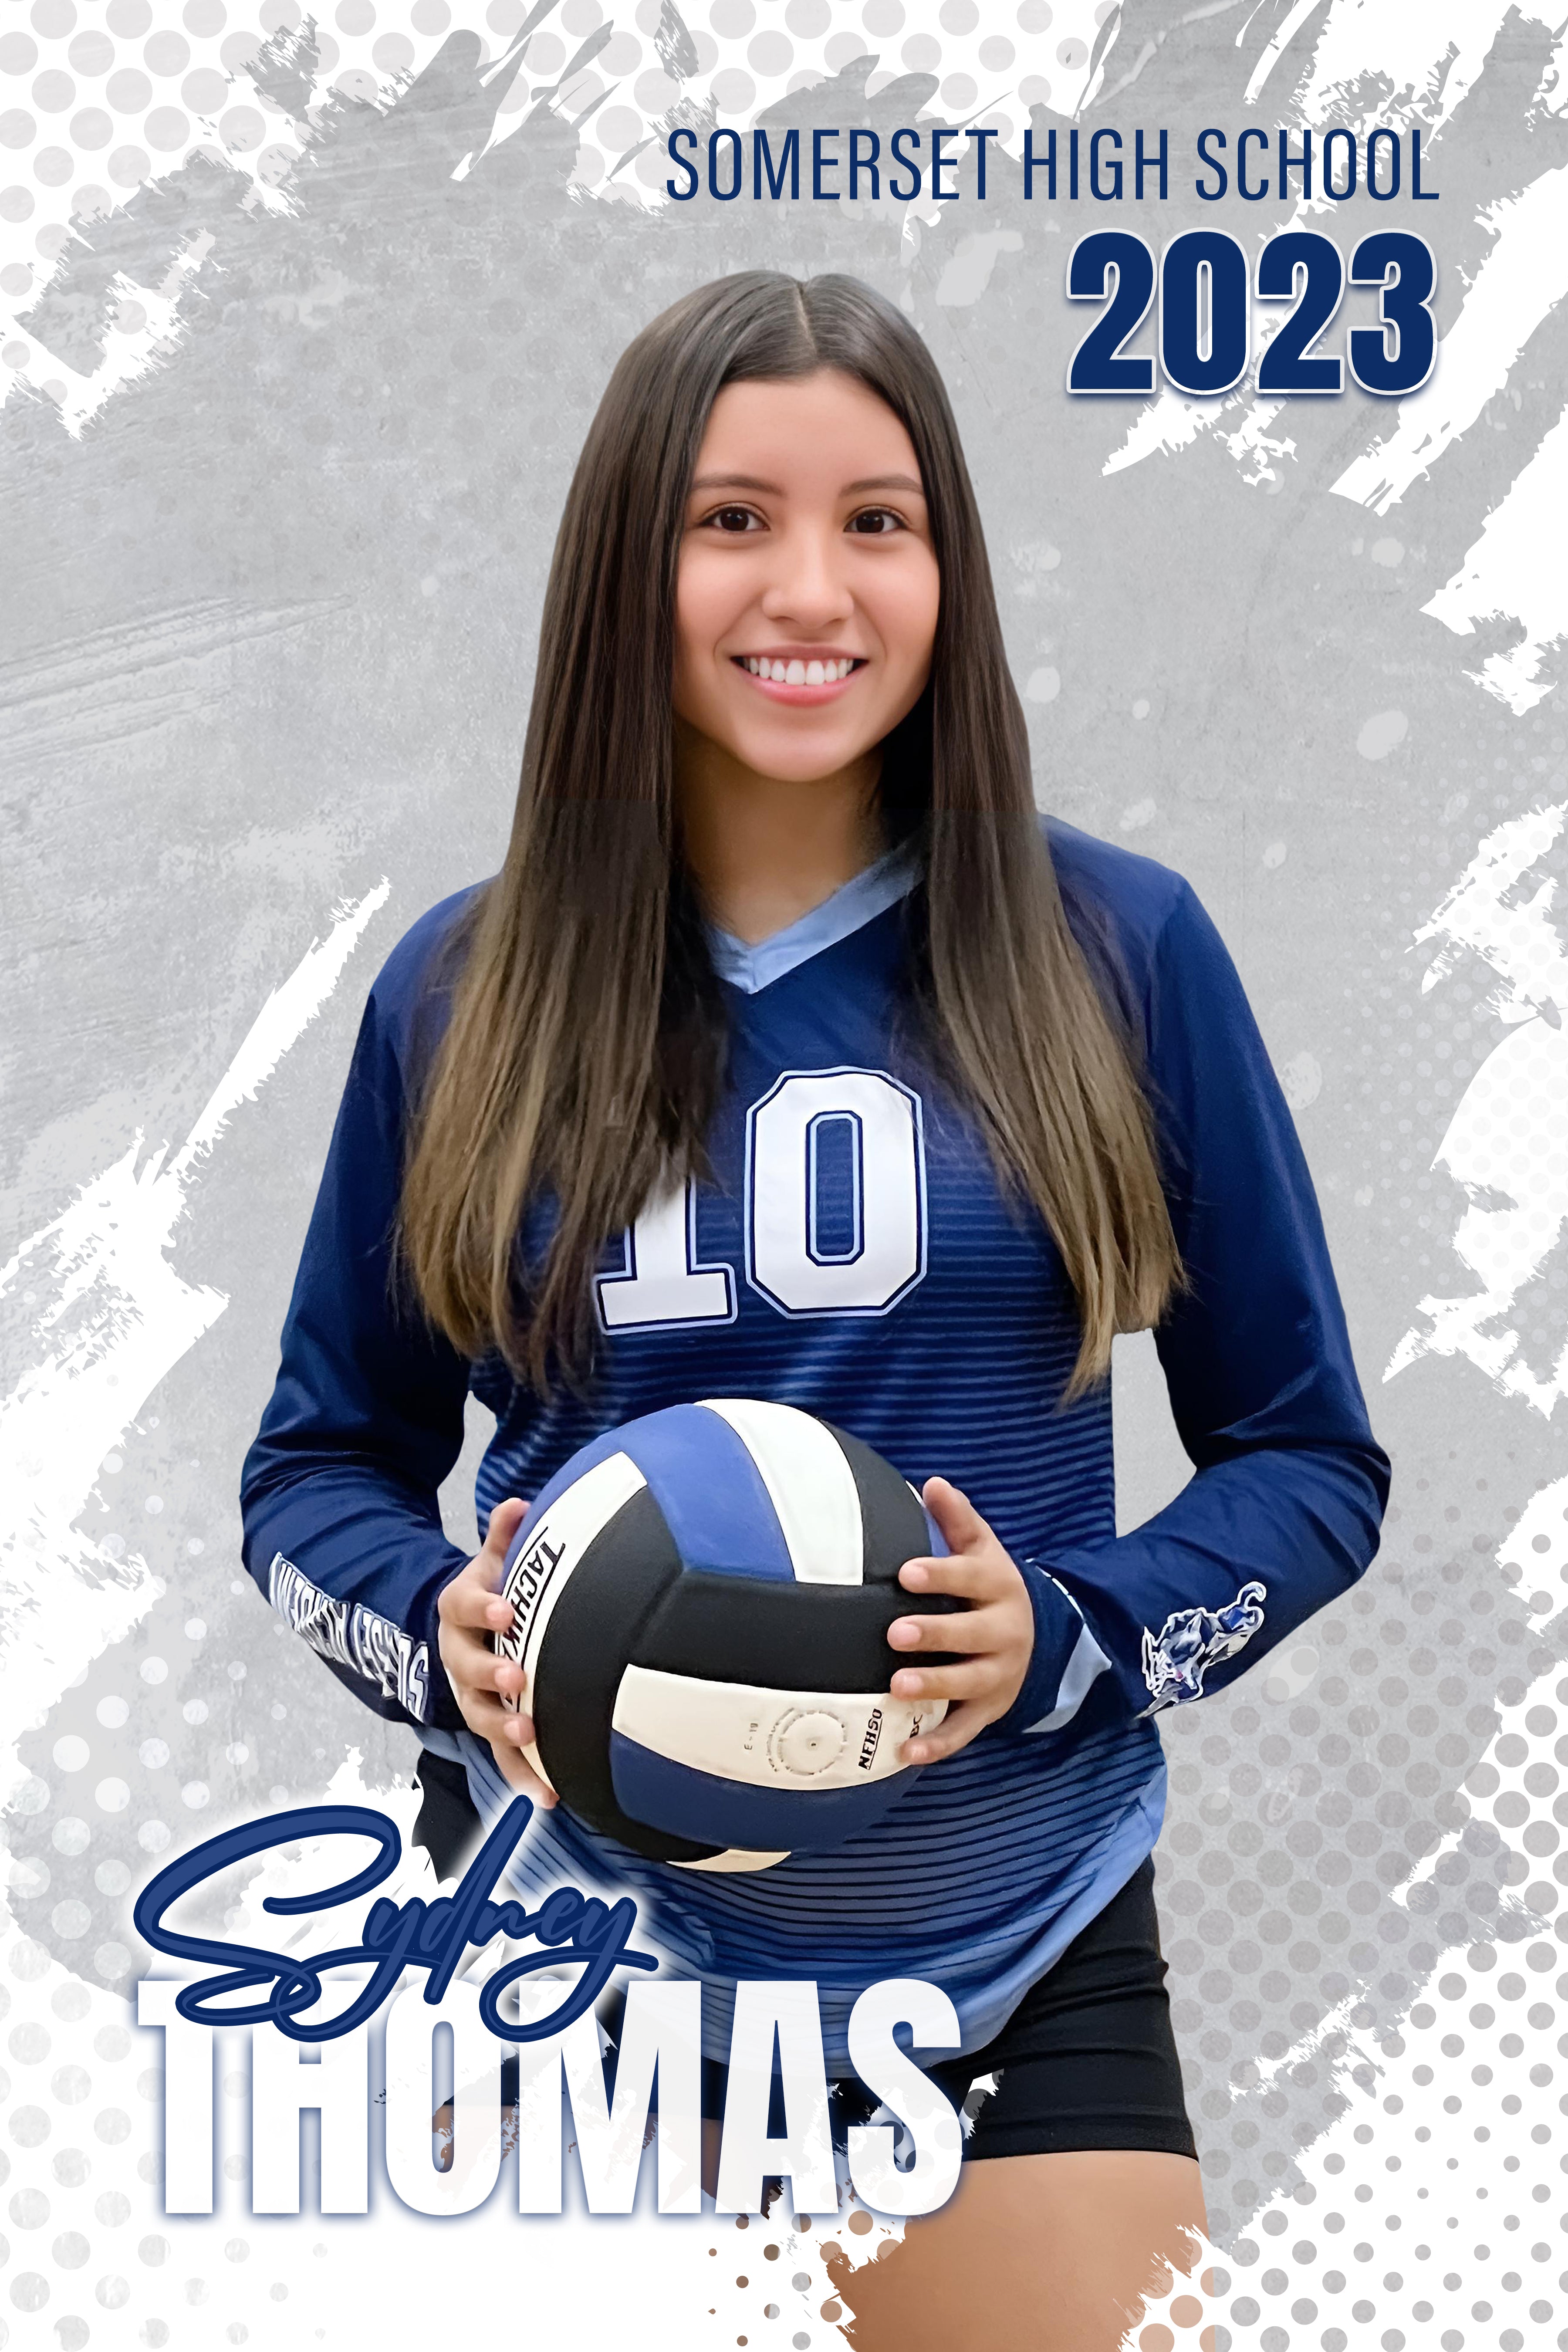 Personalized Sports Photo/Poster Print - Switch - Volleyball